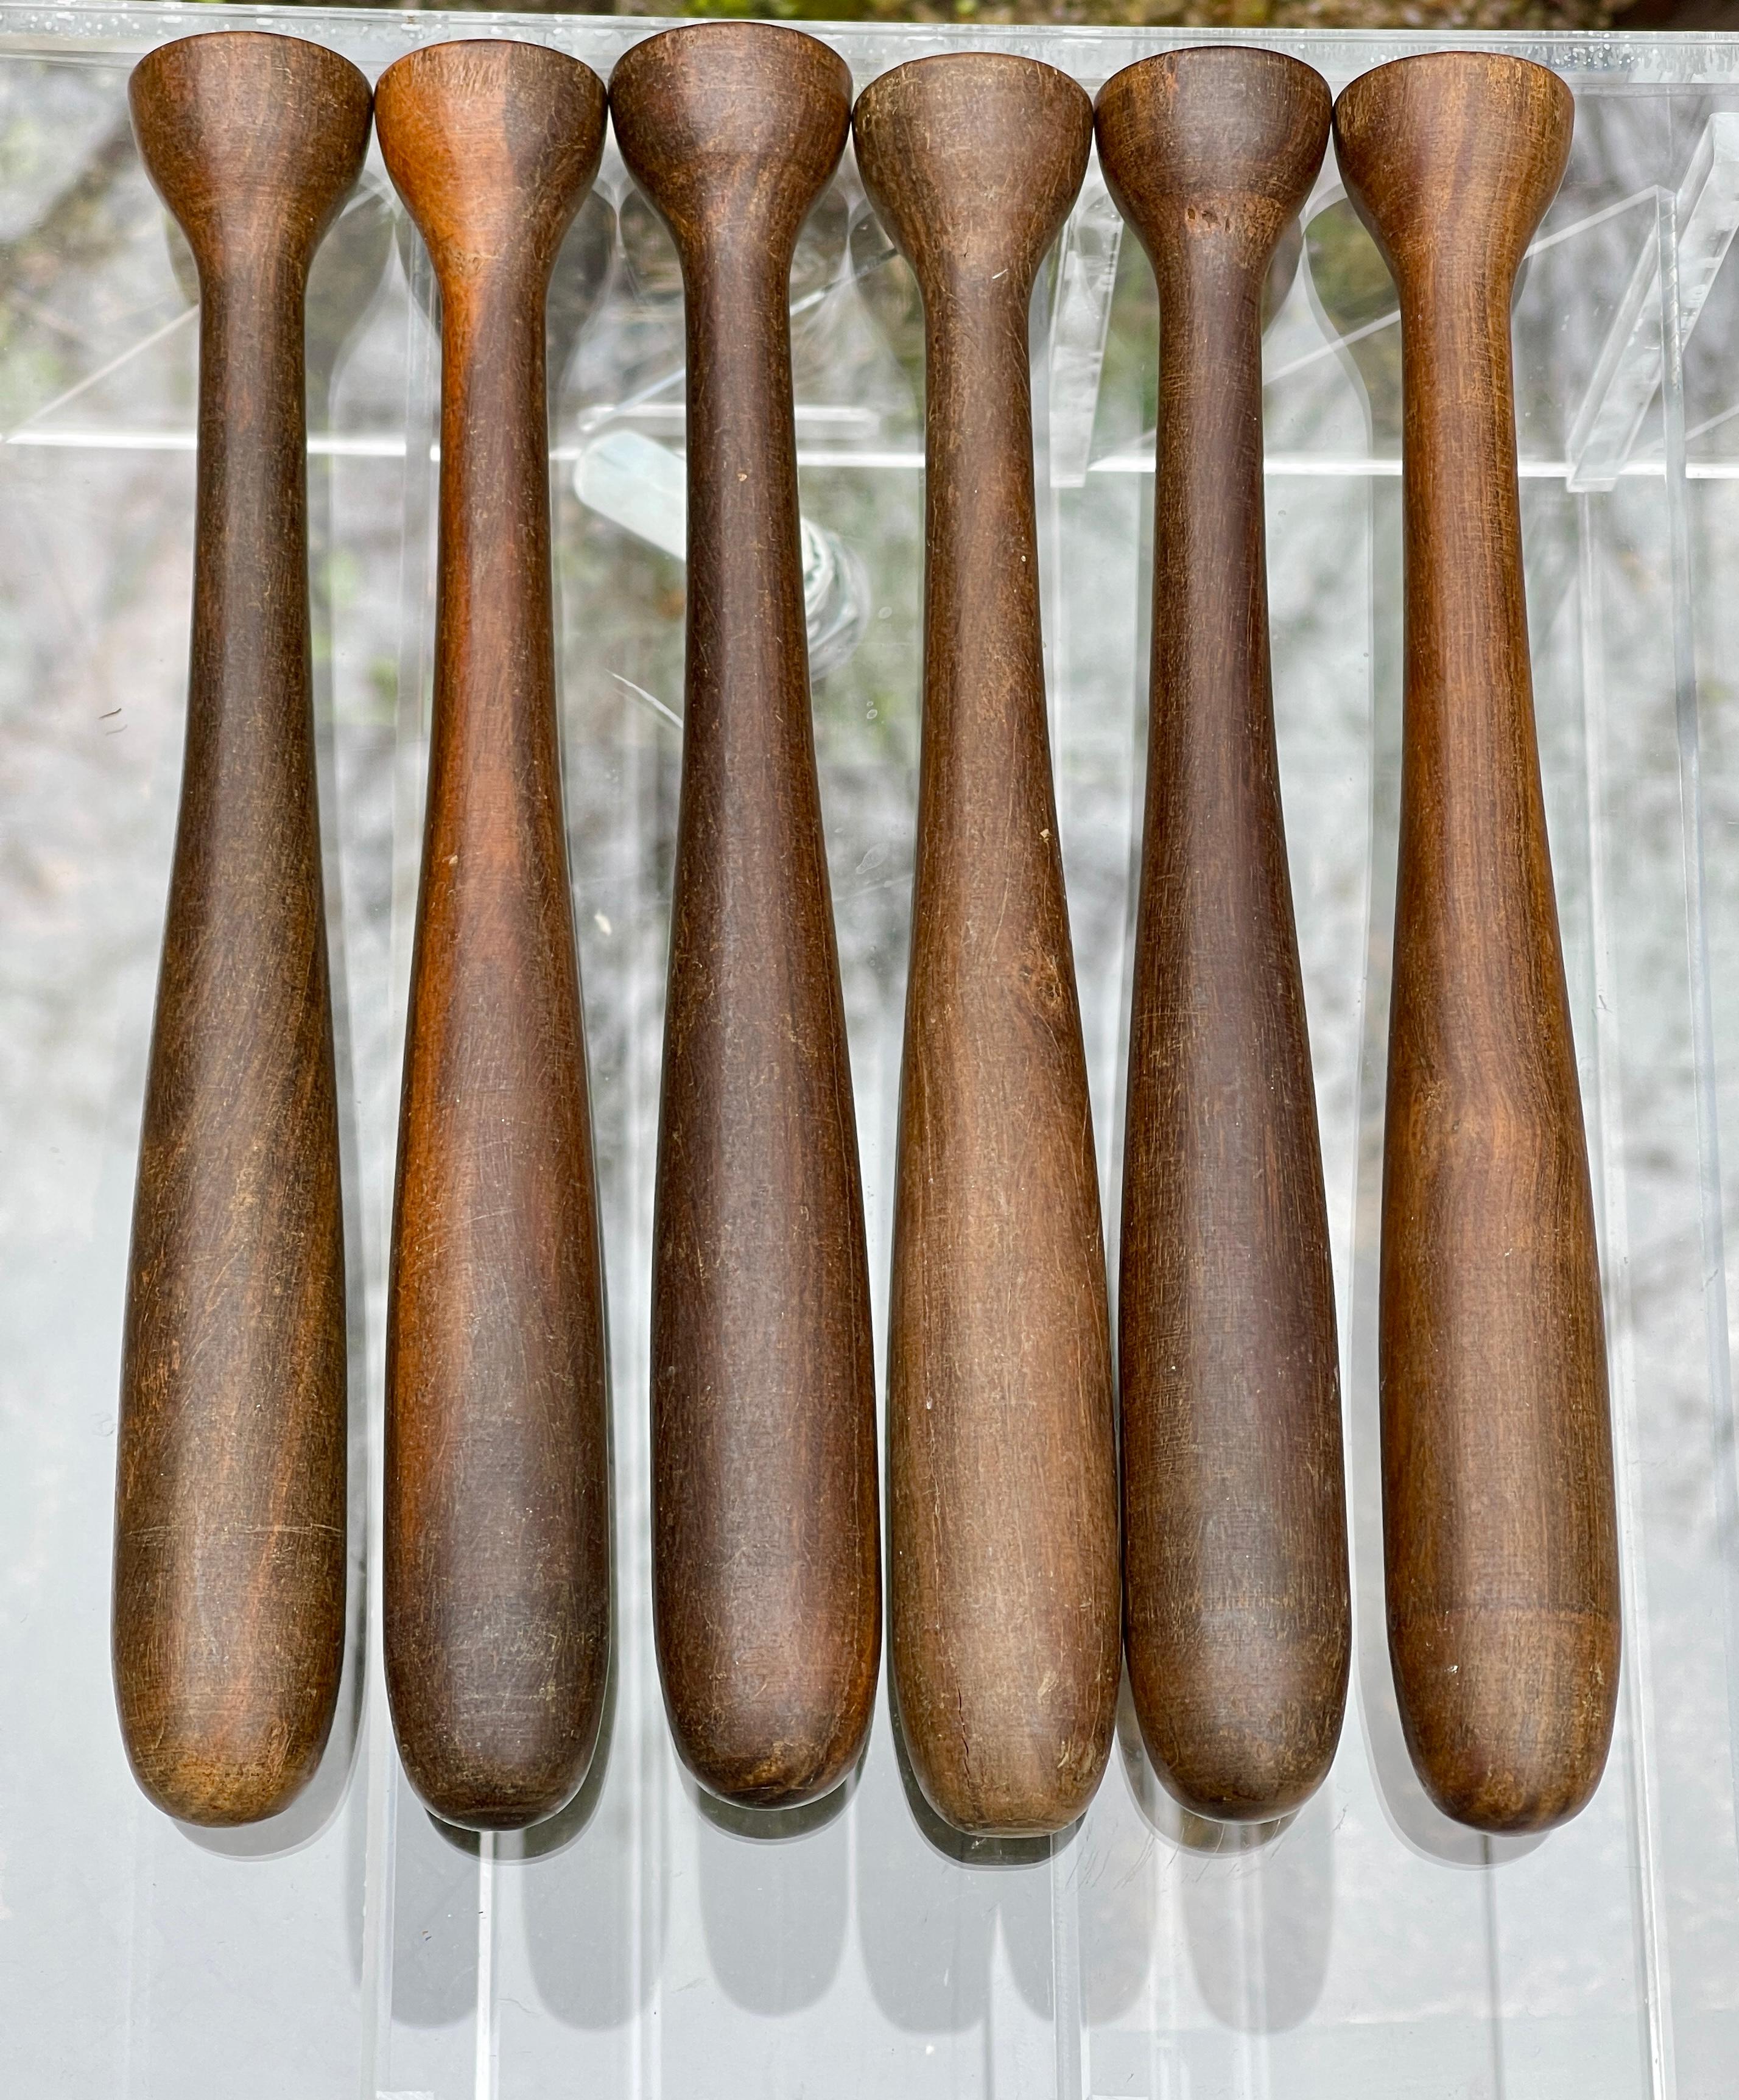 We currently have four of the original Honduran mahogany muddlers, (barware batons for mashing mojitos) from the First Class bar aboard the 1951 ocean liner SS United States. Reputedly these were among the handful of items made of wood to have been